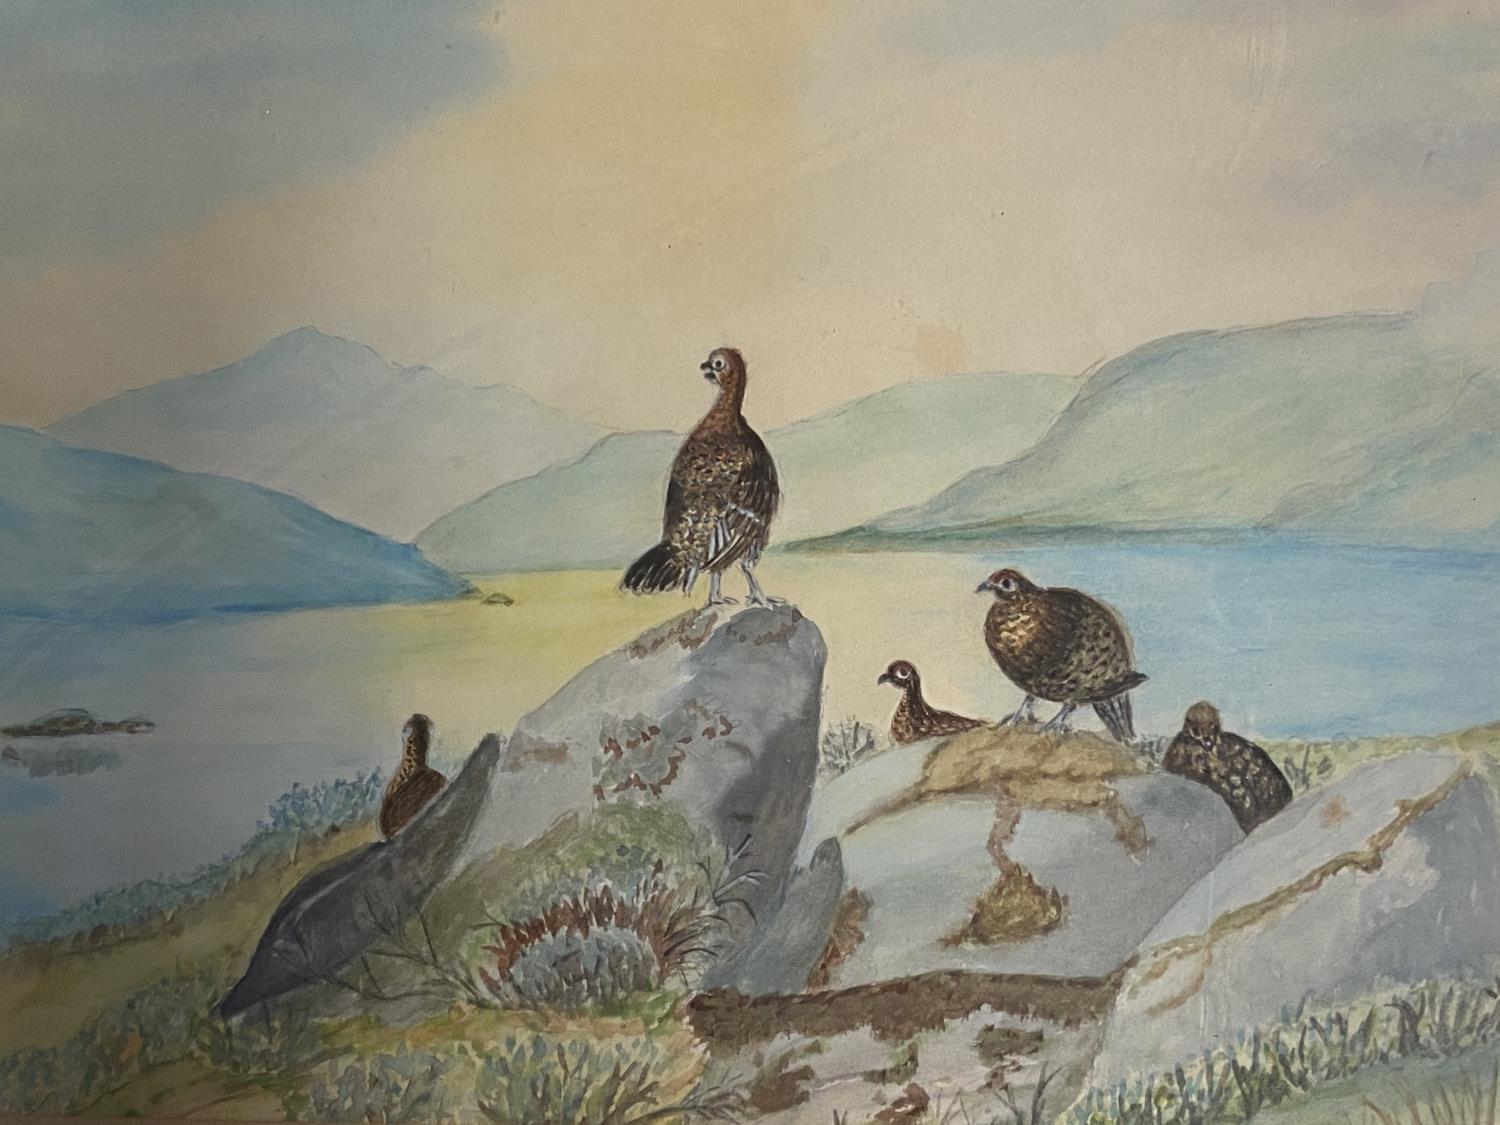 Two watercolours of grouse, one signed Roland Green - 23 x 32cm (condition ok), and signed Annis - Image 2 of 3